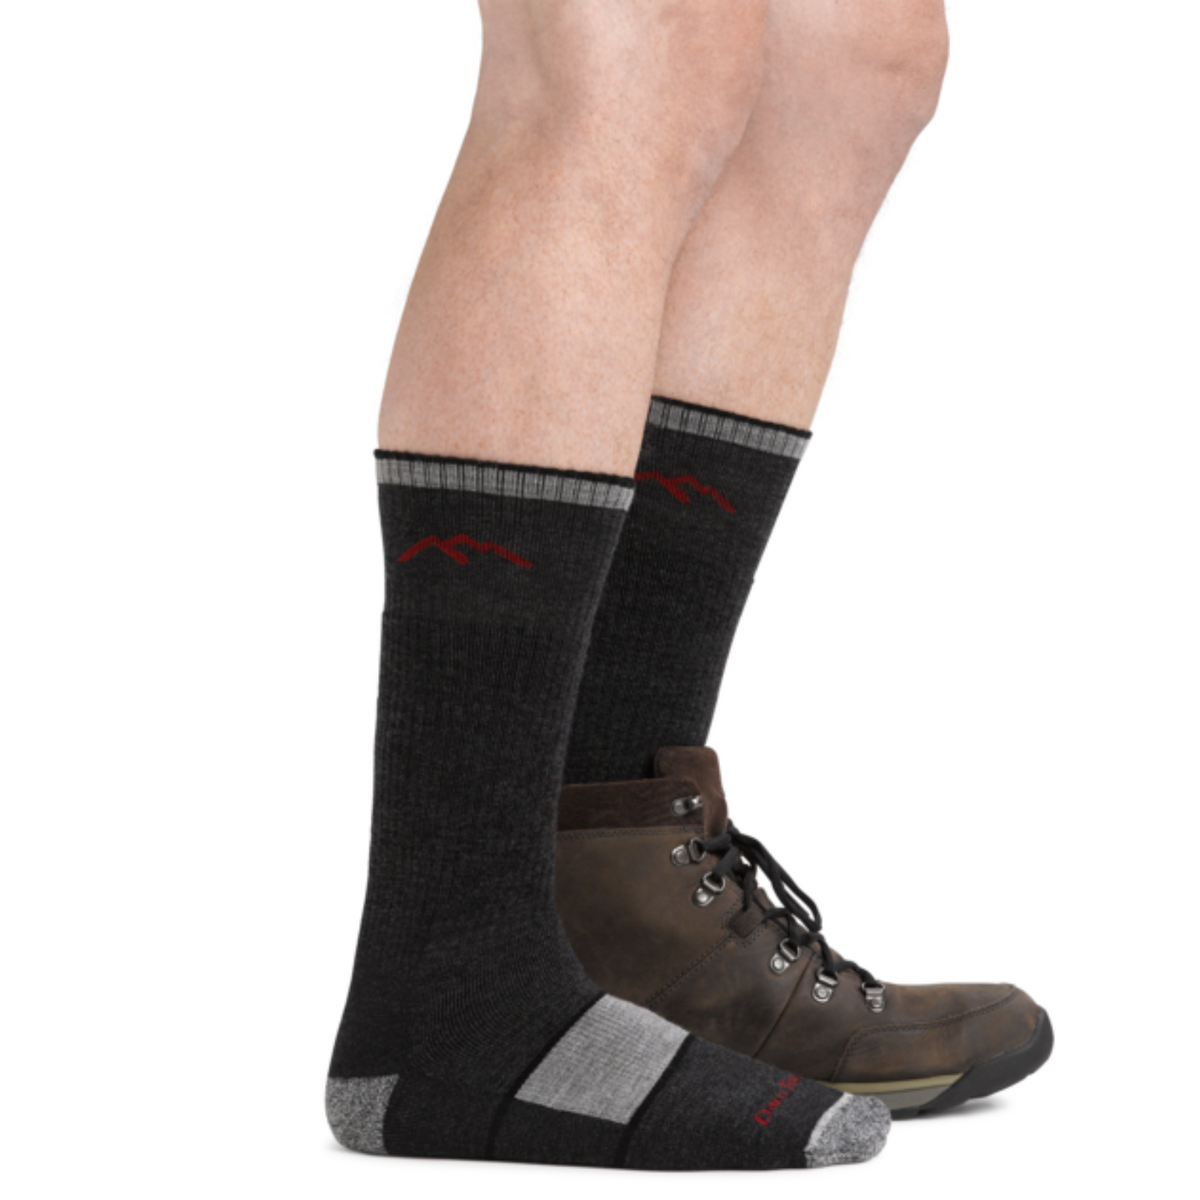 Darn Tough 1405 Hiker Boot with Full Cushion Midweight Men&#39;s crew Sock in black. Socks shown on model from side wearing one hiking boot. 